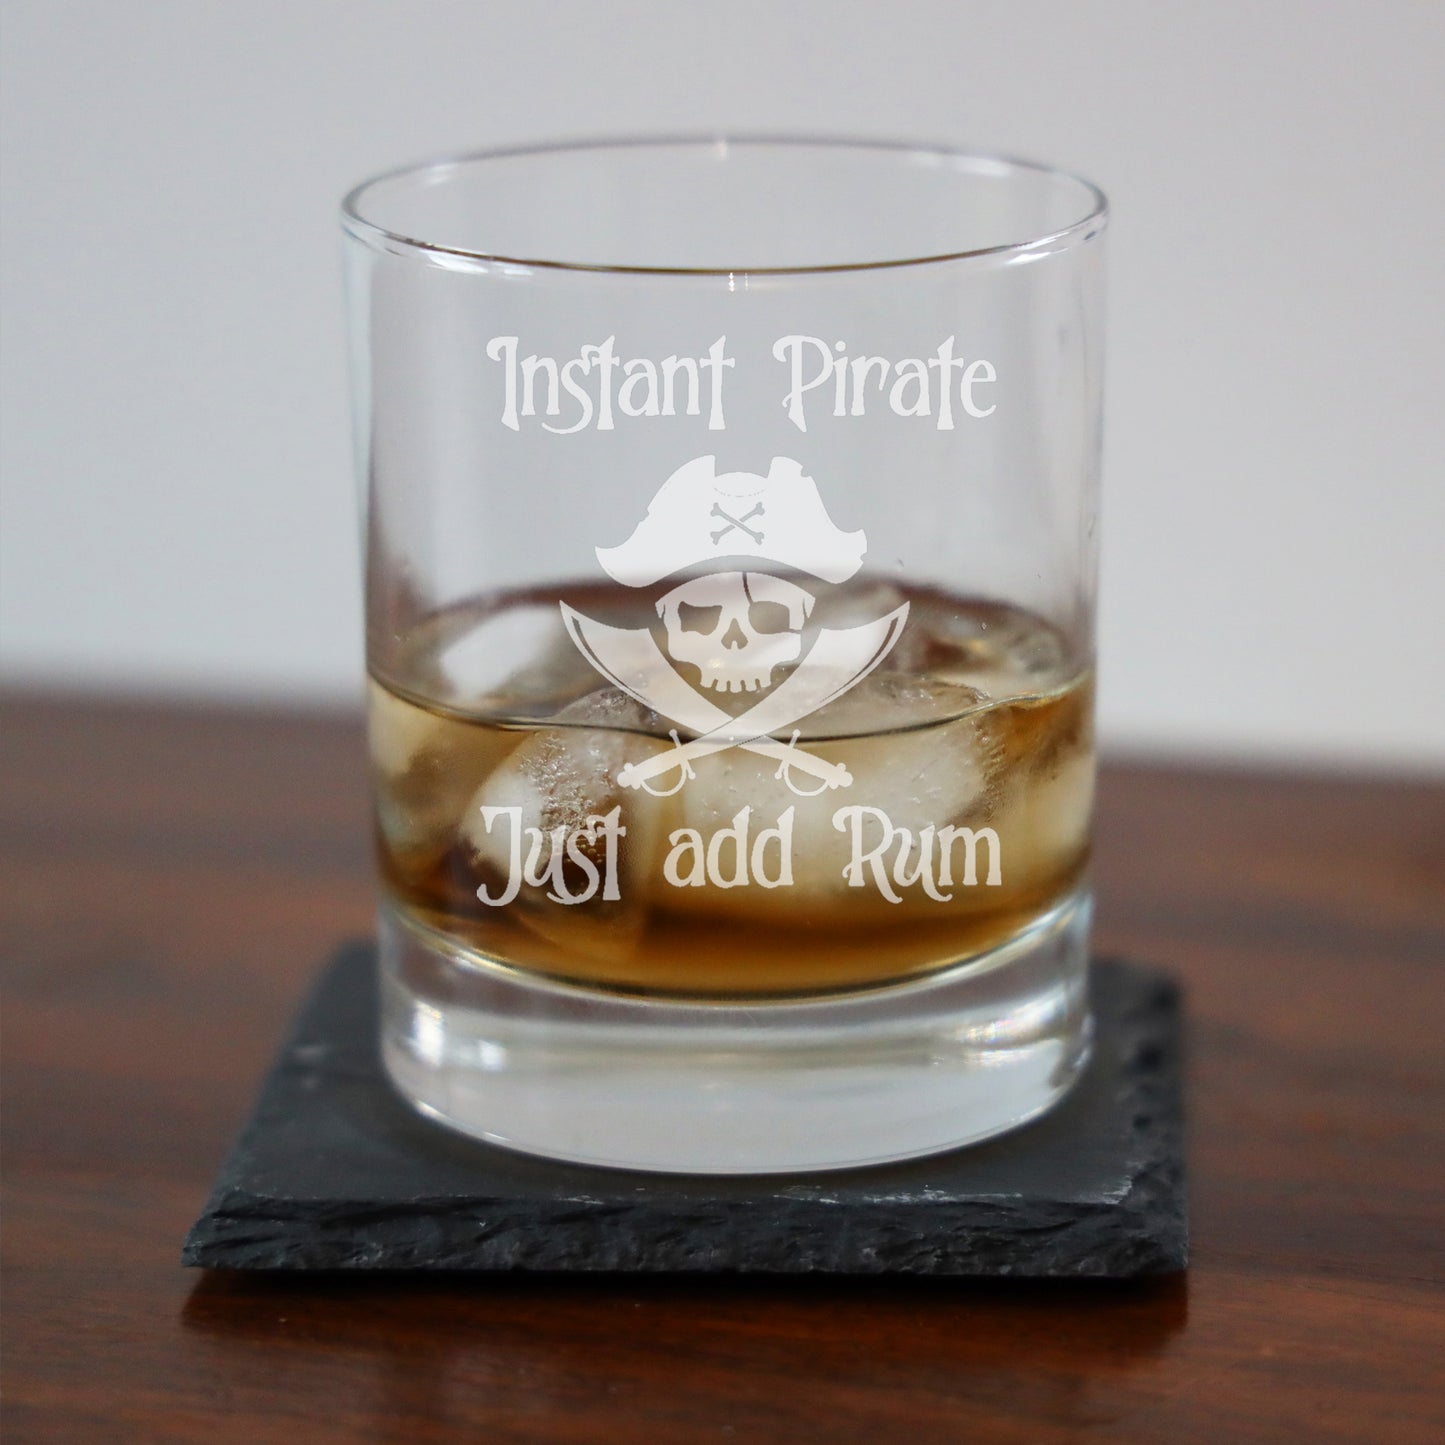 Personalised Engraved "Instant Pirate" Rum Glass and/or Coaster Set  - Always Looking Good - Glass & Square Coaster  